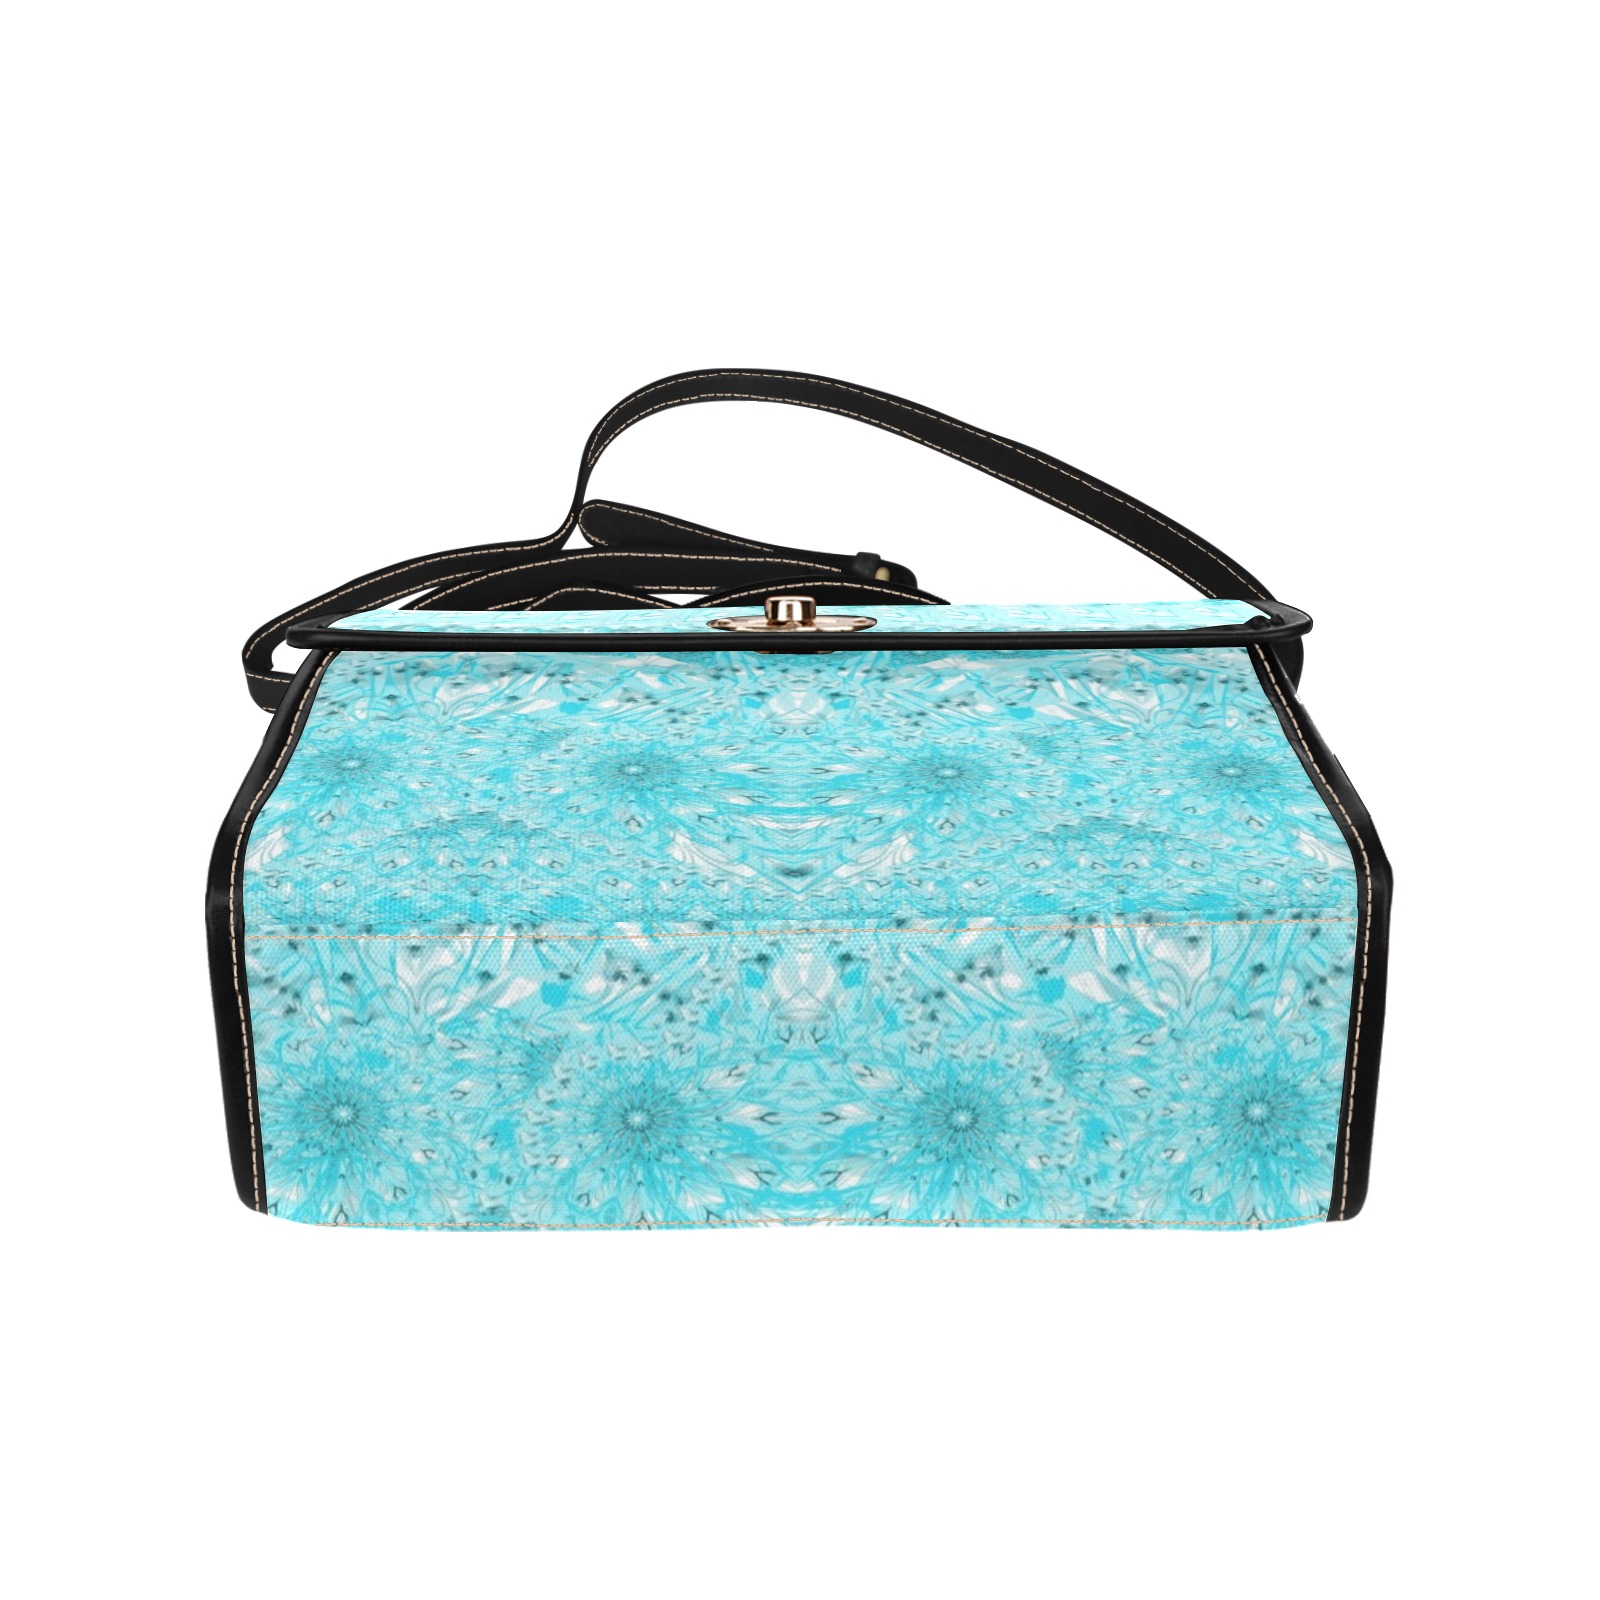 flowers and jewels Waterproof Canvas Bag-Black (All Over Print) (Model 1641)